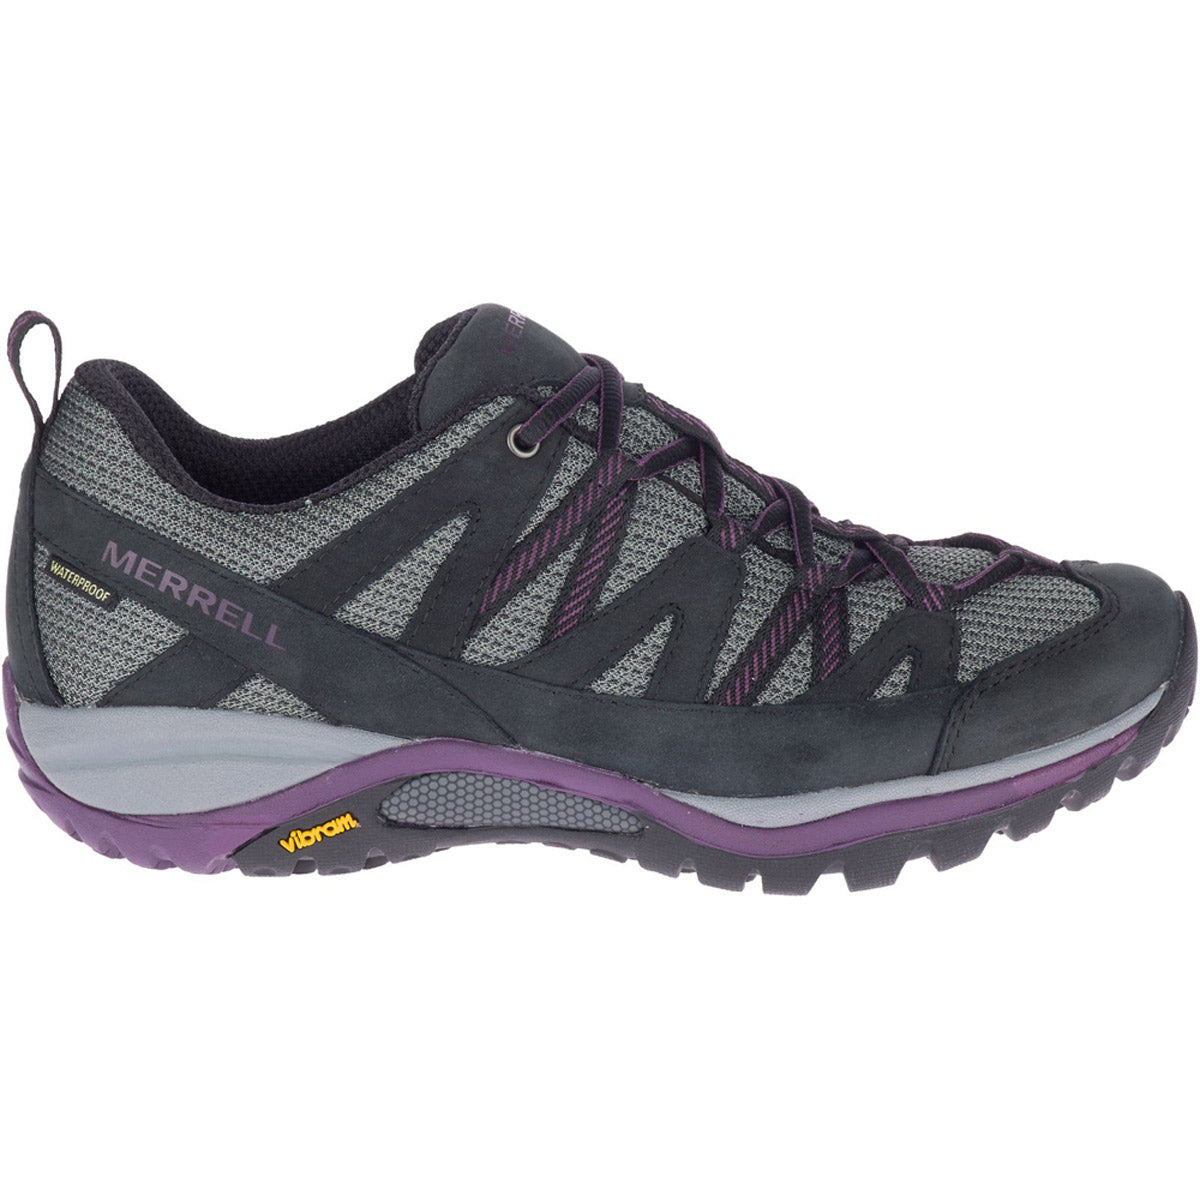 Side view of a black and blackberry Merrell Siren Sport 3 hiking shoe with Vibram sole and Merrell Air Cushion.